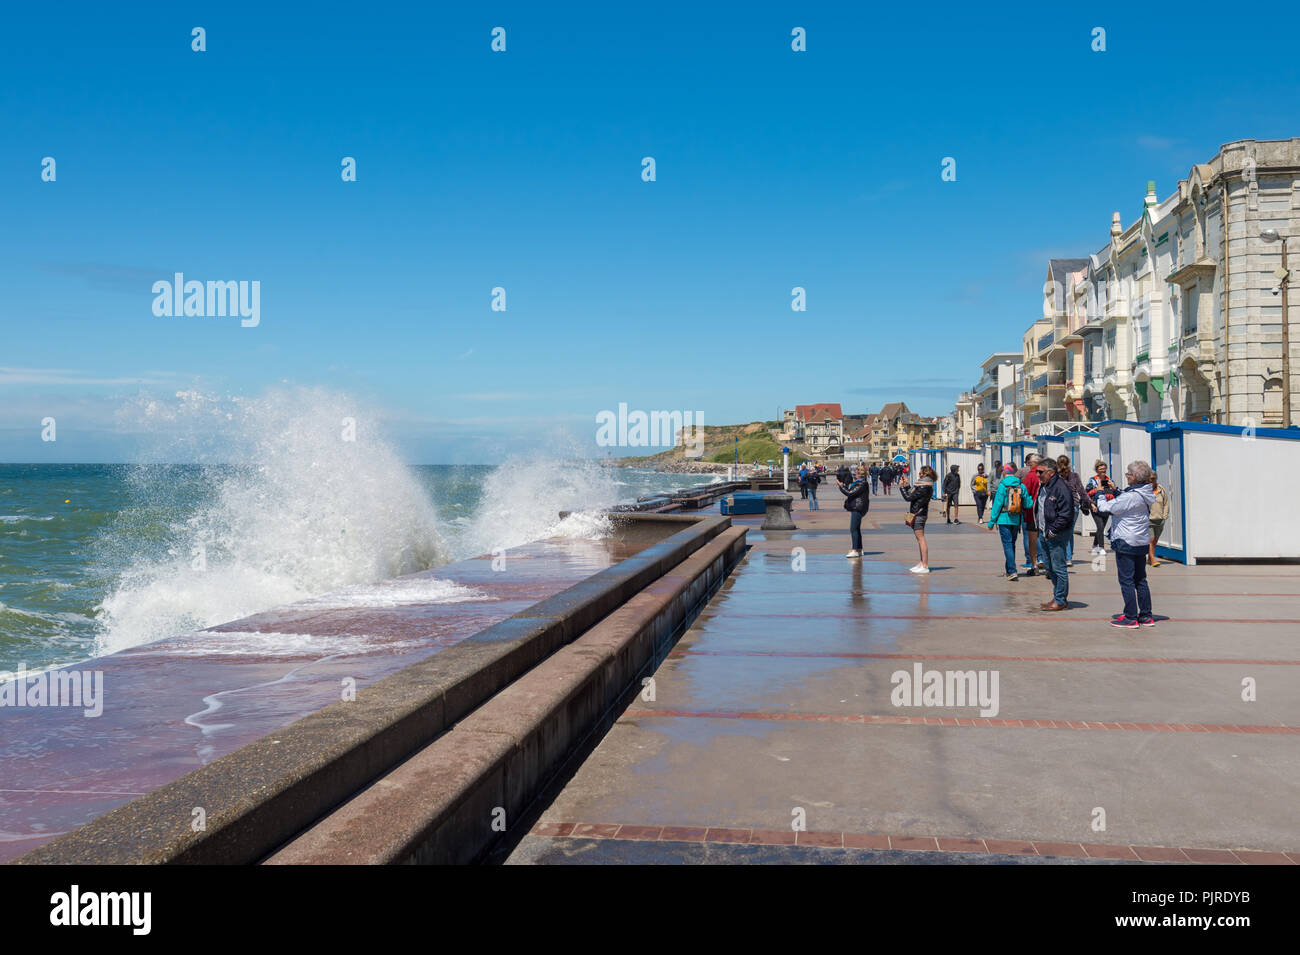 Wimereux, France - 16 June 2018: People walking on the sea front promenade as waves are hitting the sea wall. Stock Photo